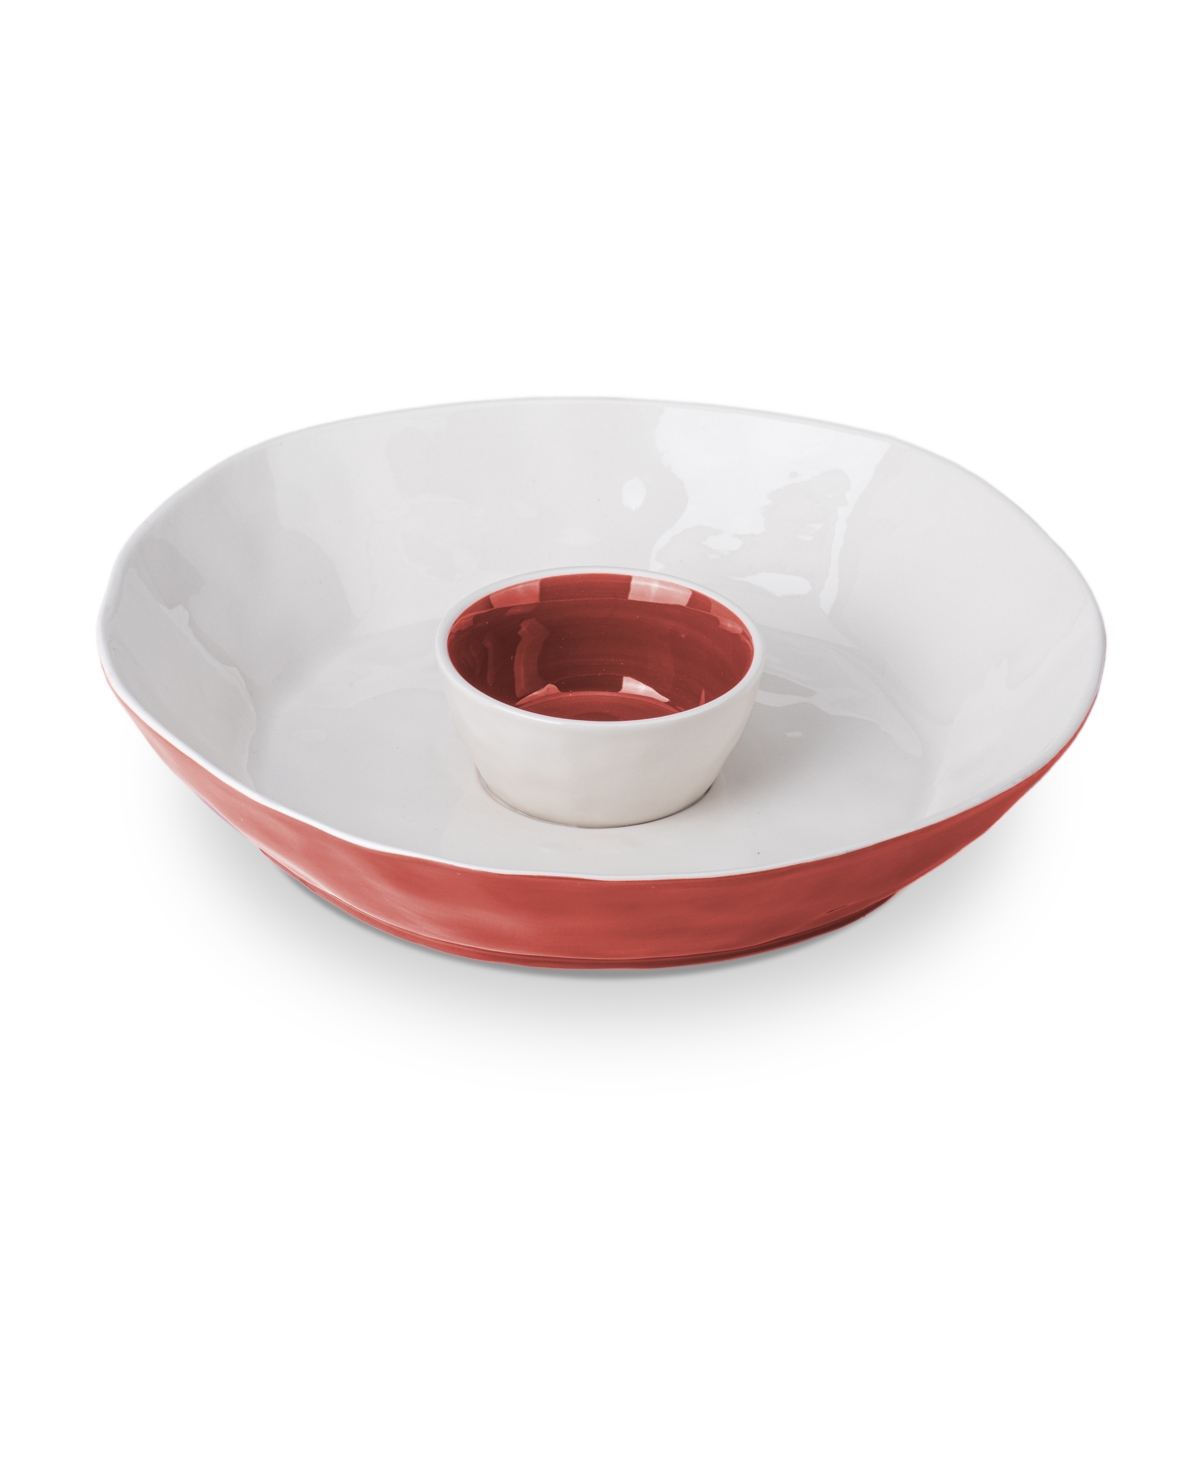 Thirstystone Ceramic Chip And Dip Bowl In Terracotta Red